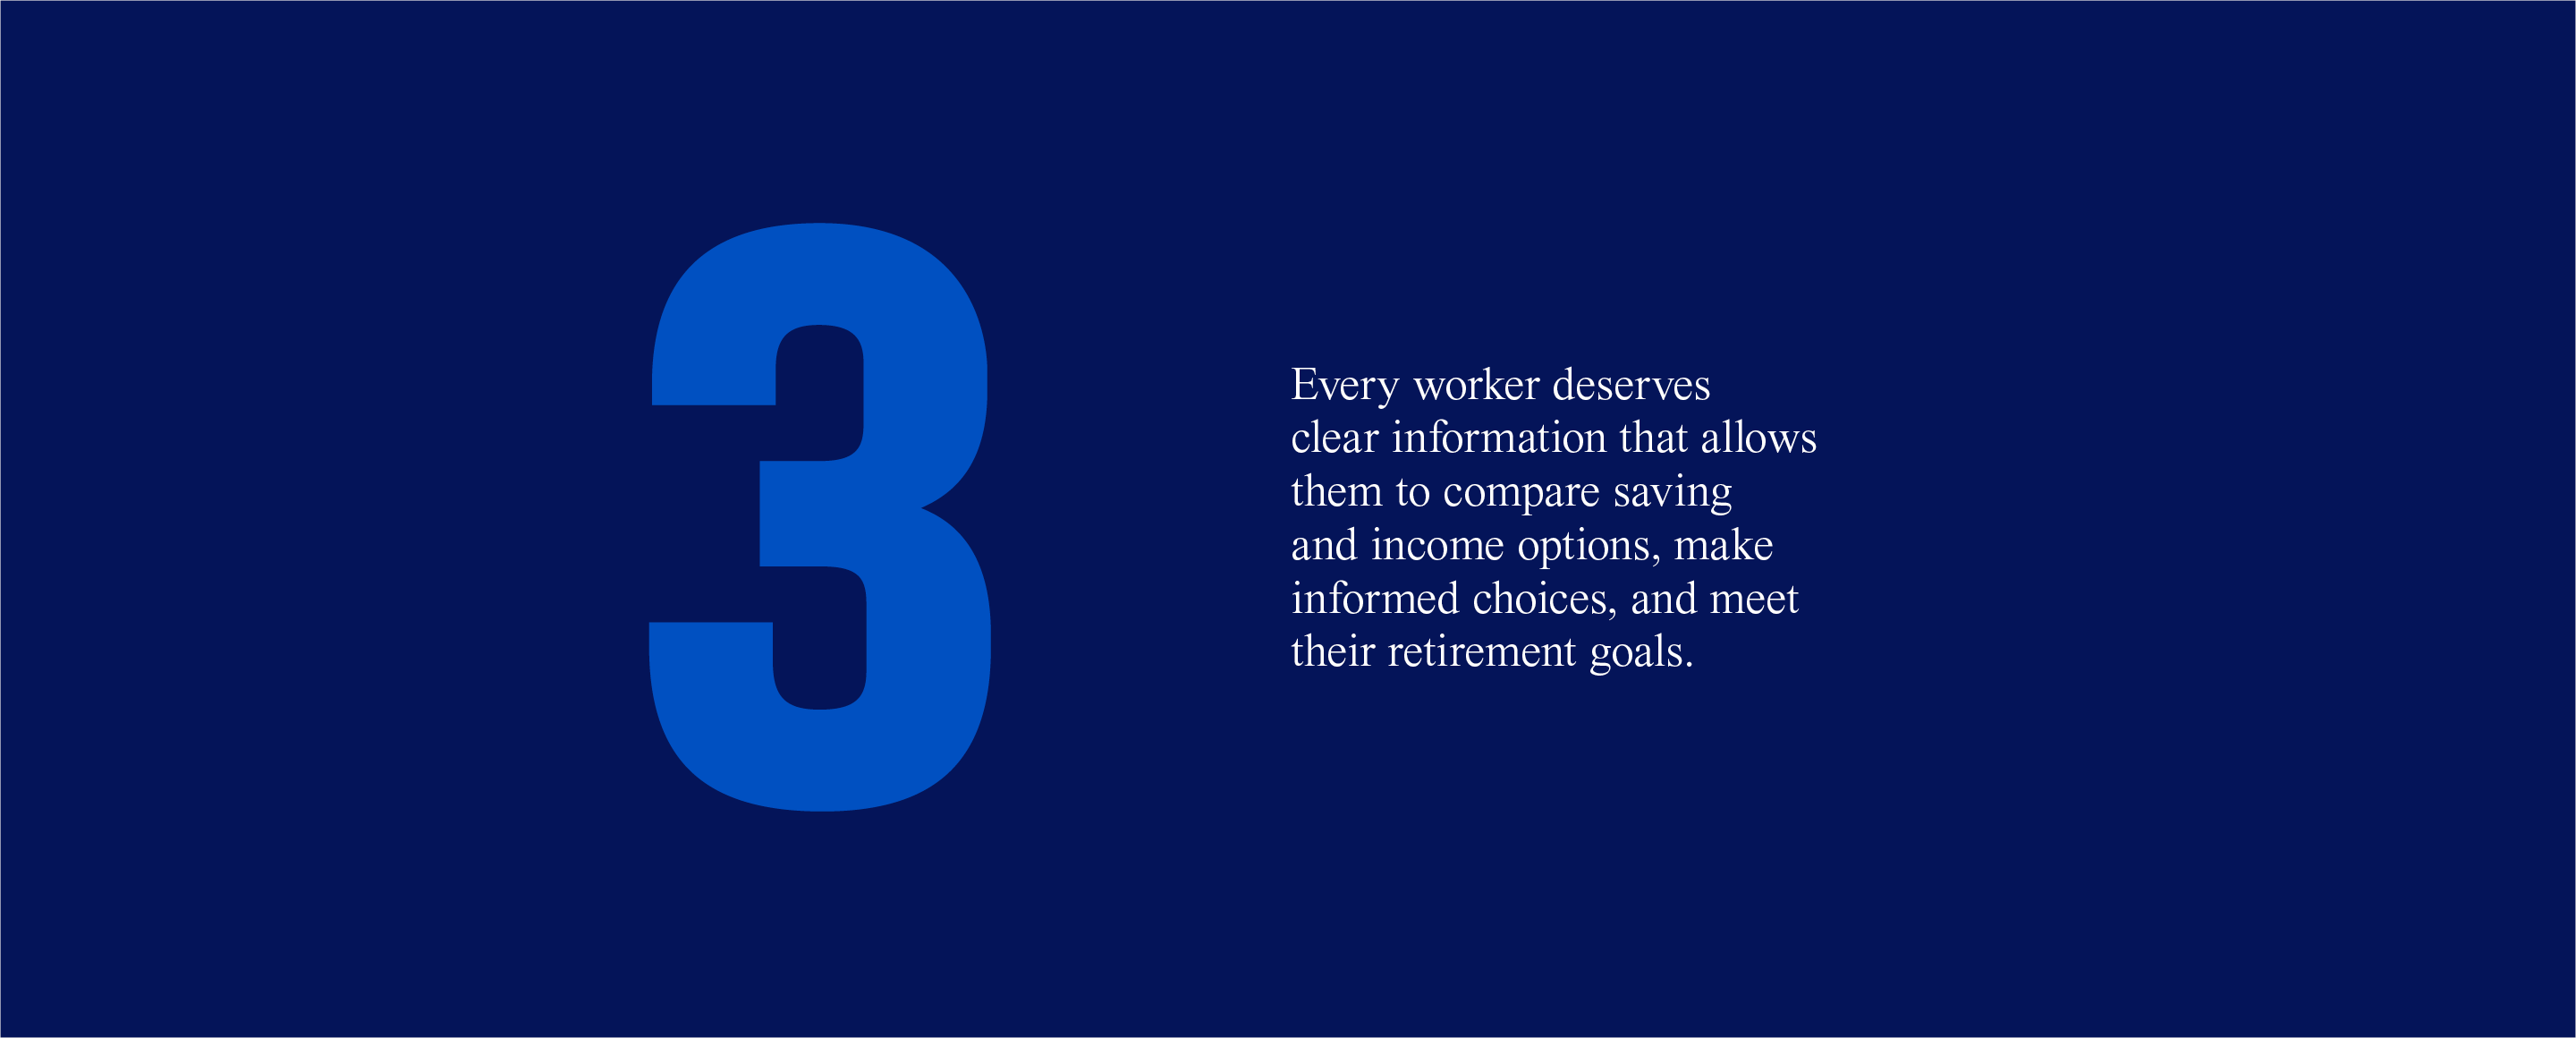 3. Every worker deserves clear information that allows them to compare saving and income options, make informed choices and meet their retirement goals.